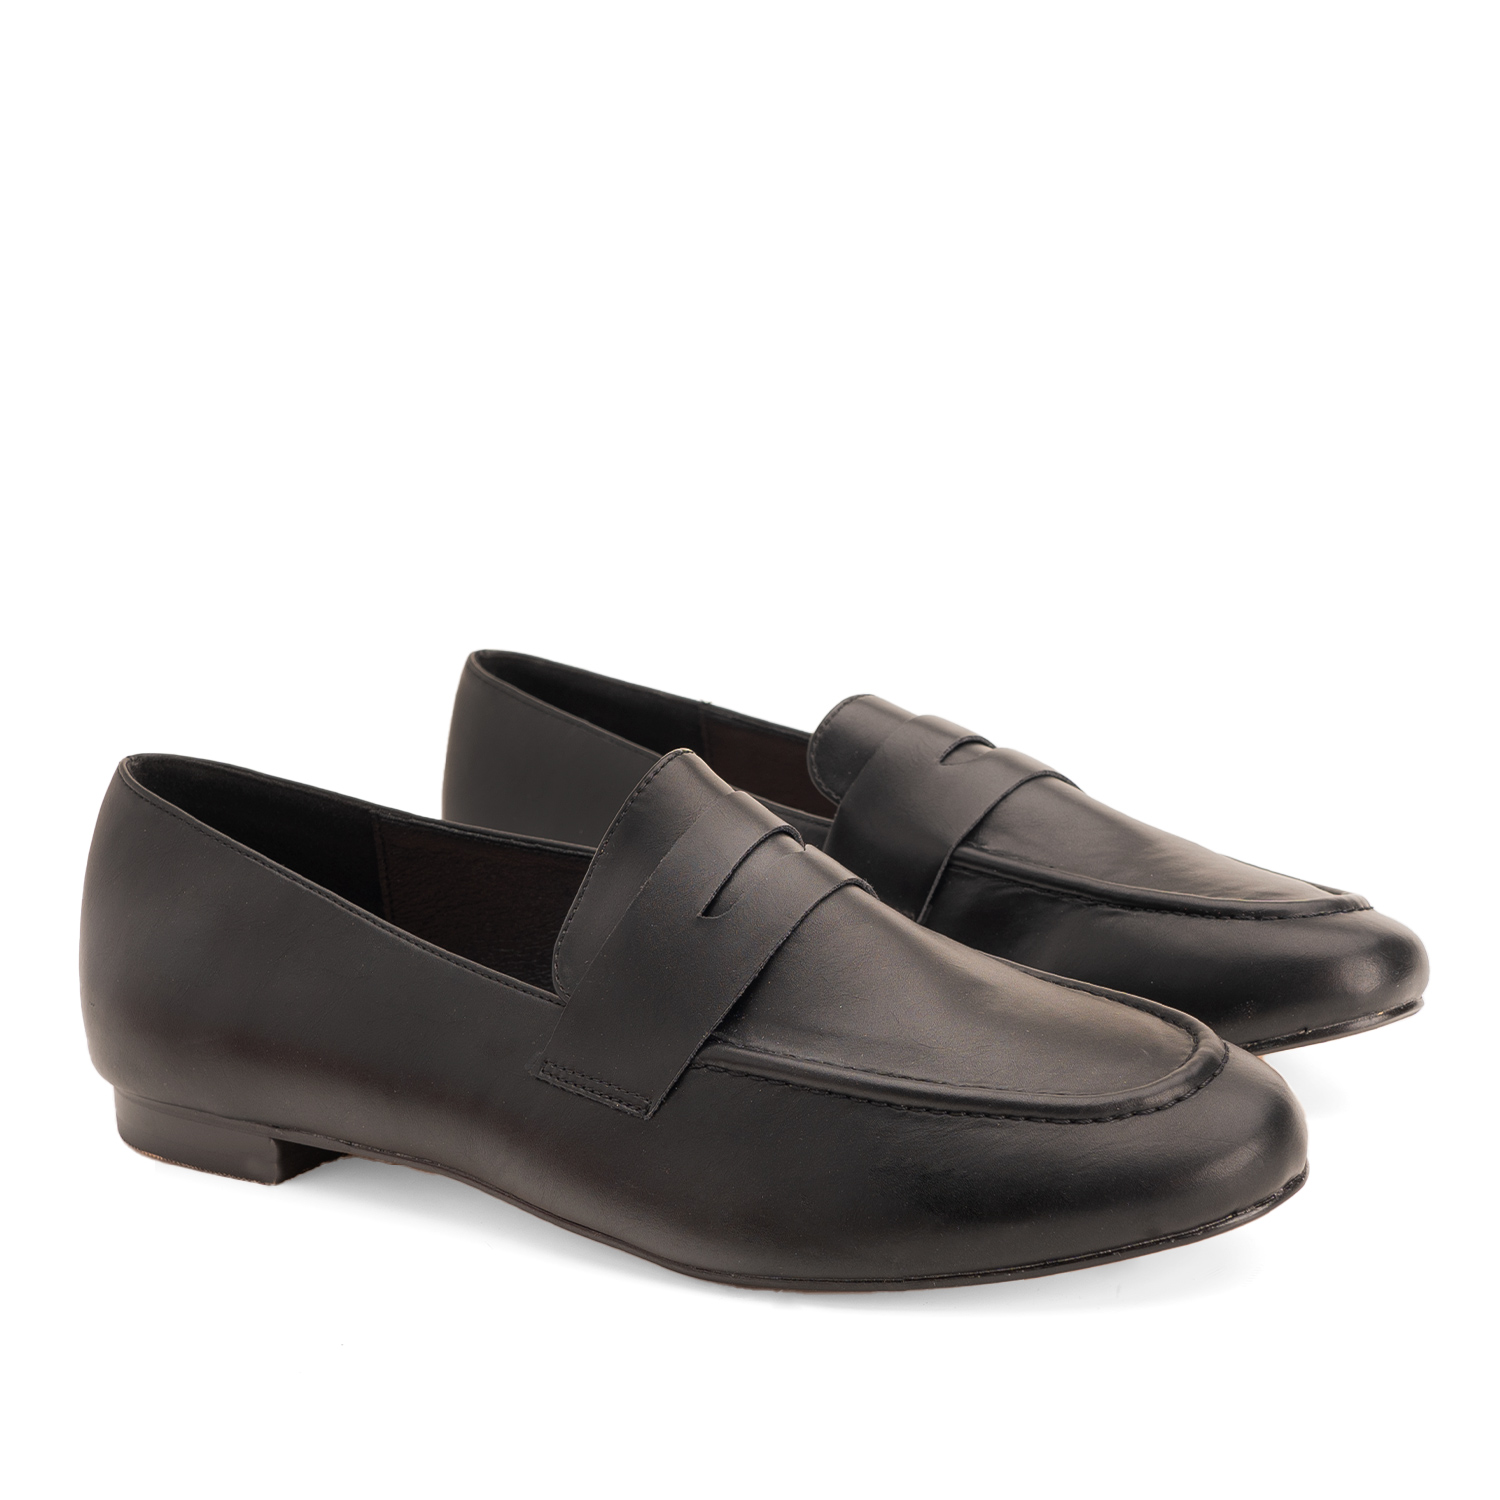 Penny loafer in black faux leather 